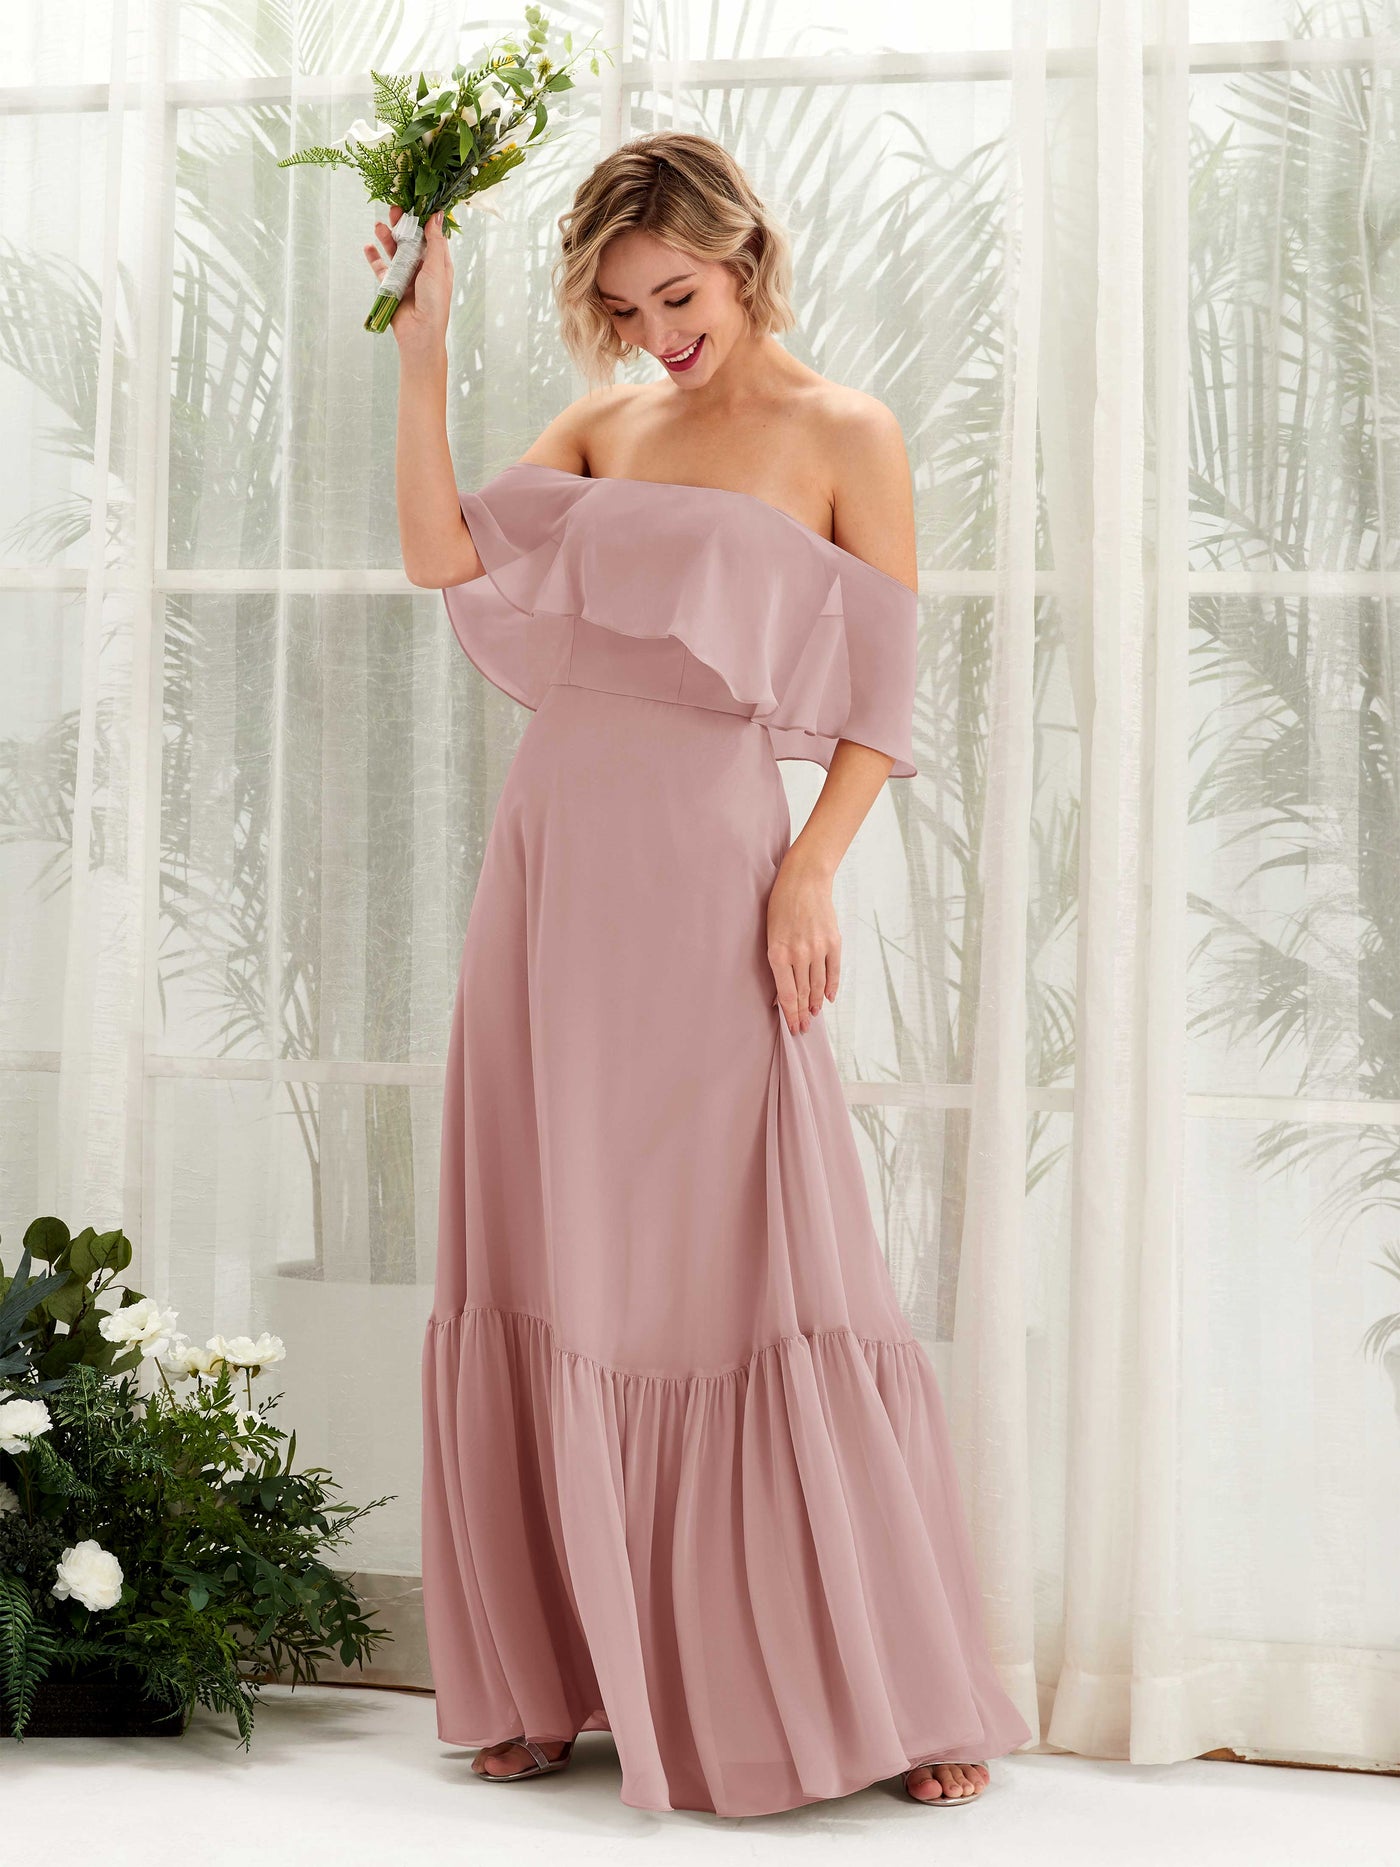 Dusty Rose Bridesmaid Dresses Bridesmaid Dress A-line Chiffon Off Shoulder Full Length Sleeveless Wedding Party Dress (81224509)#color_dusty-rose